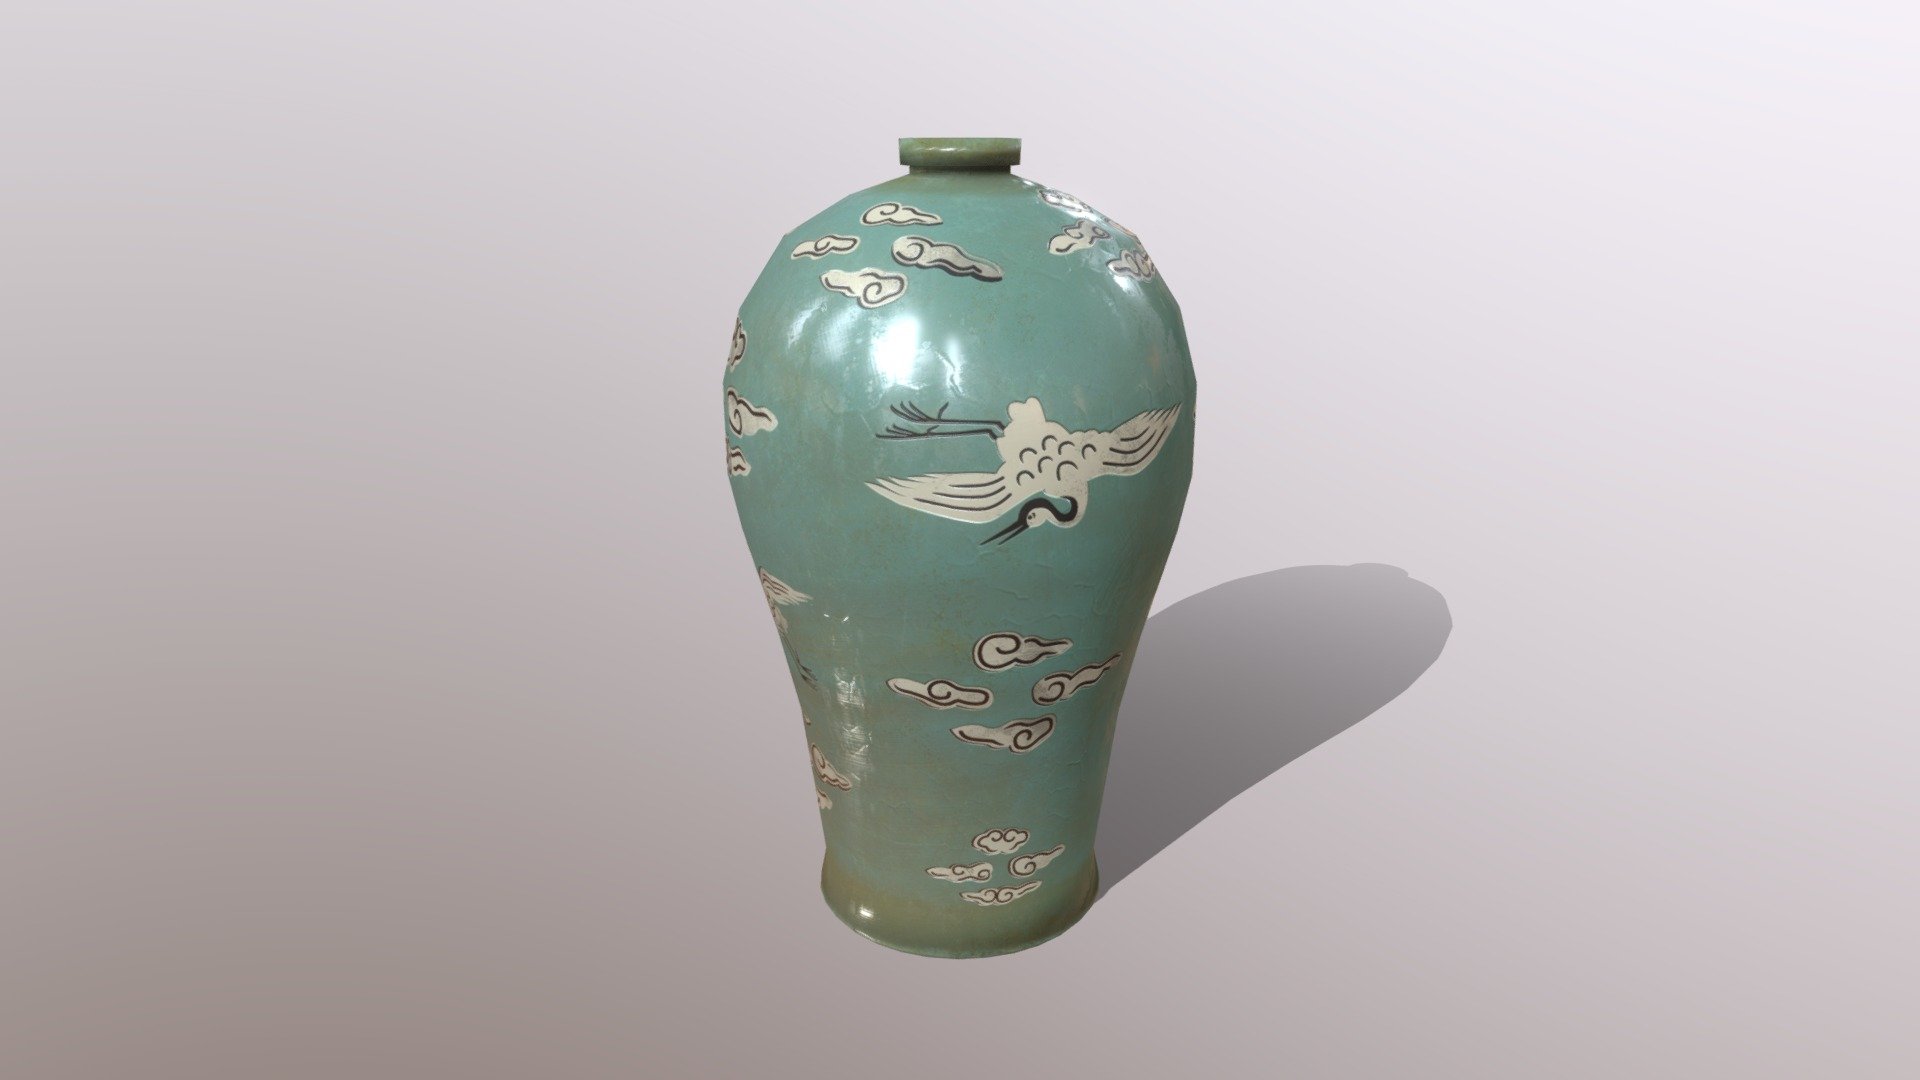 This is a Korean maebyeong decorated with cranes and clouds (popular motifs on Goryeo celadon) from the second half of the 12th century. Literally meaning “plum bottle,” maebyeong is a shape inspired by contemporaneous and earlier Chinese vessels

I made it in Blender and did the texturing in Substance Painter using some references from metmuseum.org. There's also an attached additional file with vectors for the cranes and clouds alphas, so you can use them while texturing.

Enjoy! :) - Maebyeong with Cranes and Clouds + ALPHA VECTORS - Buy Royalty Free 3D model by Anežka Hájková (@anezka) 3d model